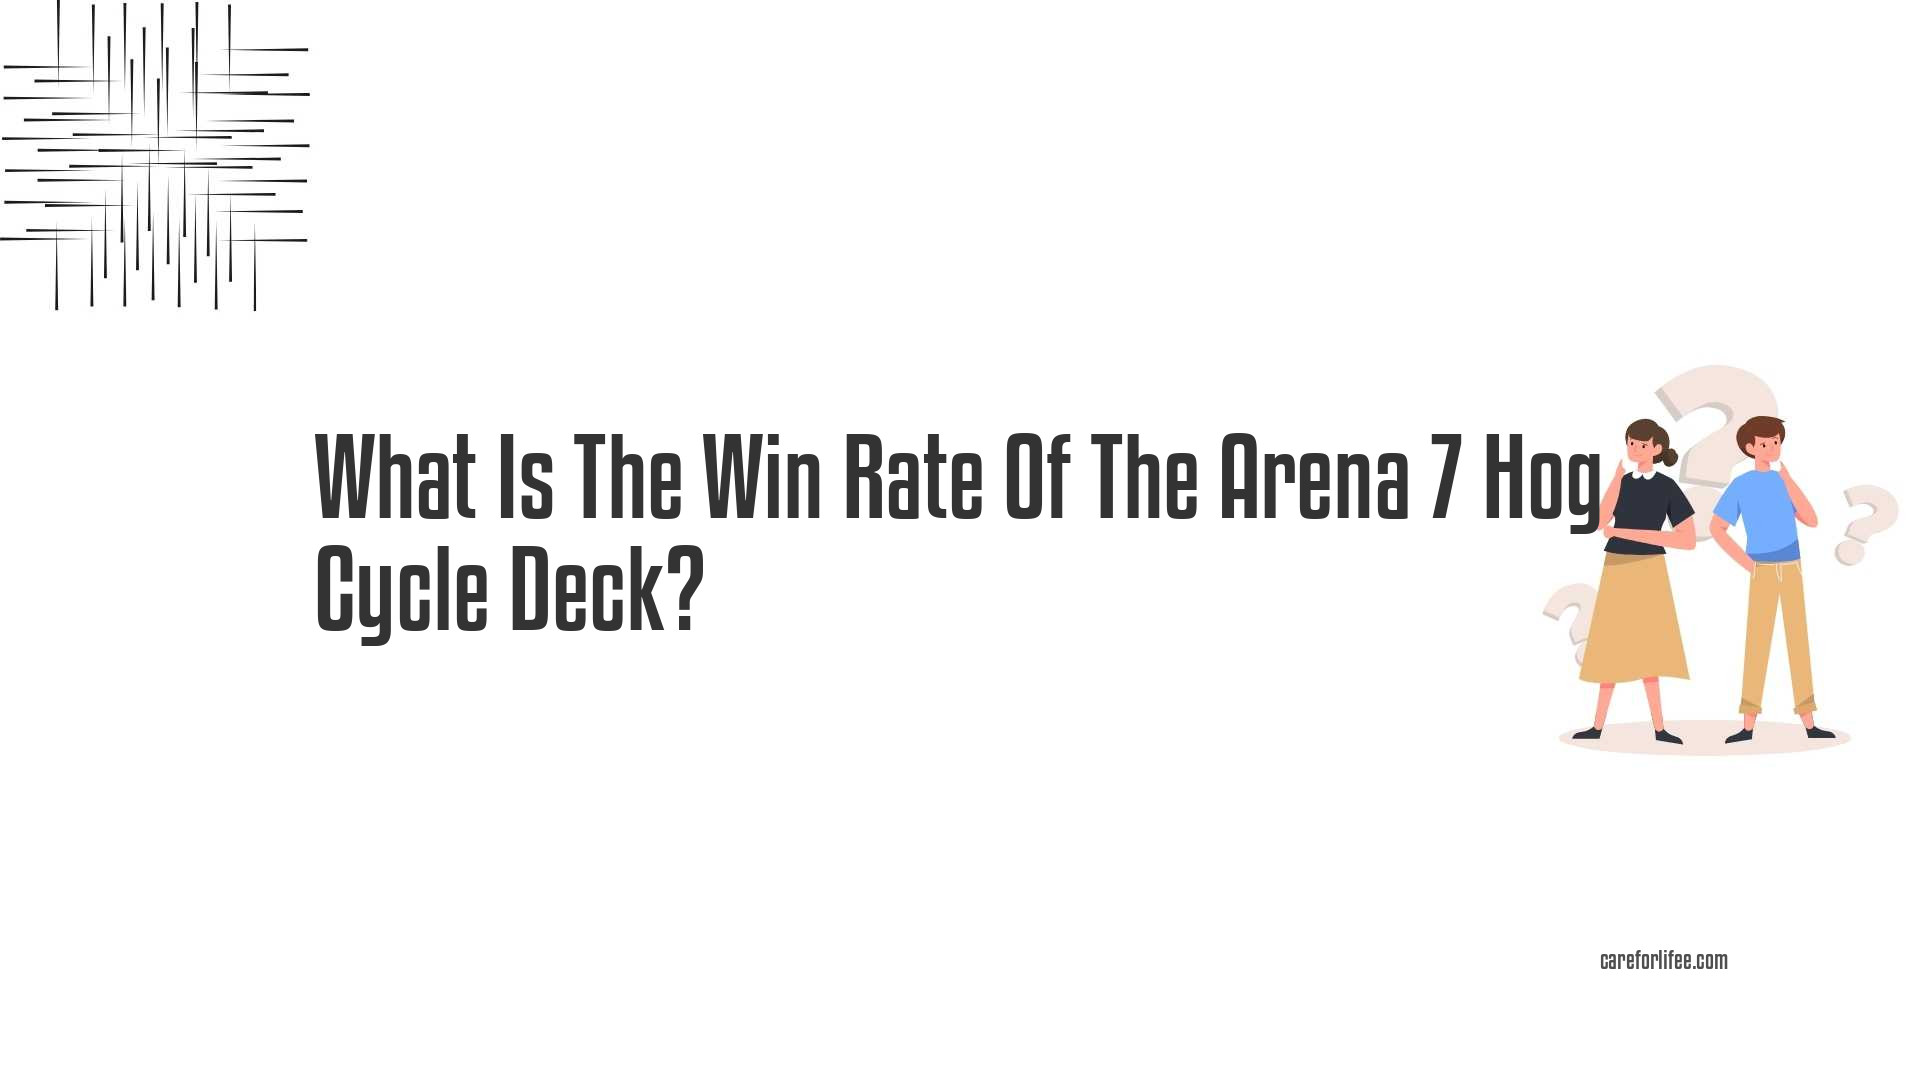 What Is The Win Rate Of The Arena 7 Hog Cycle Deck?